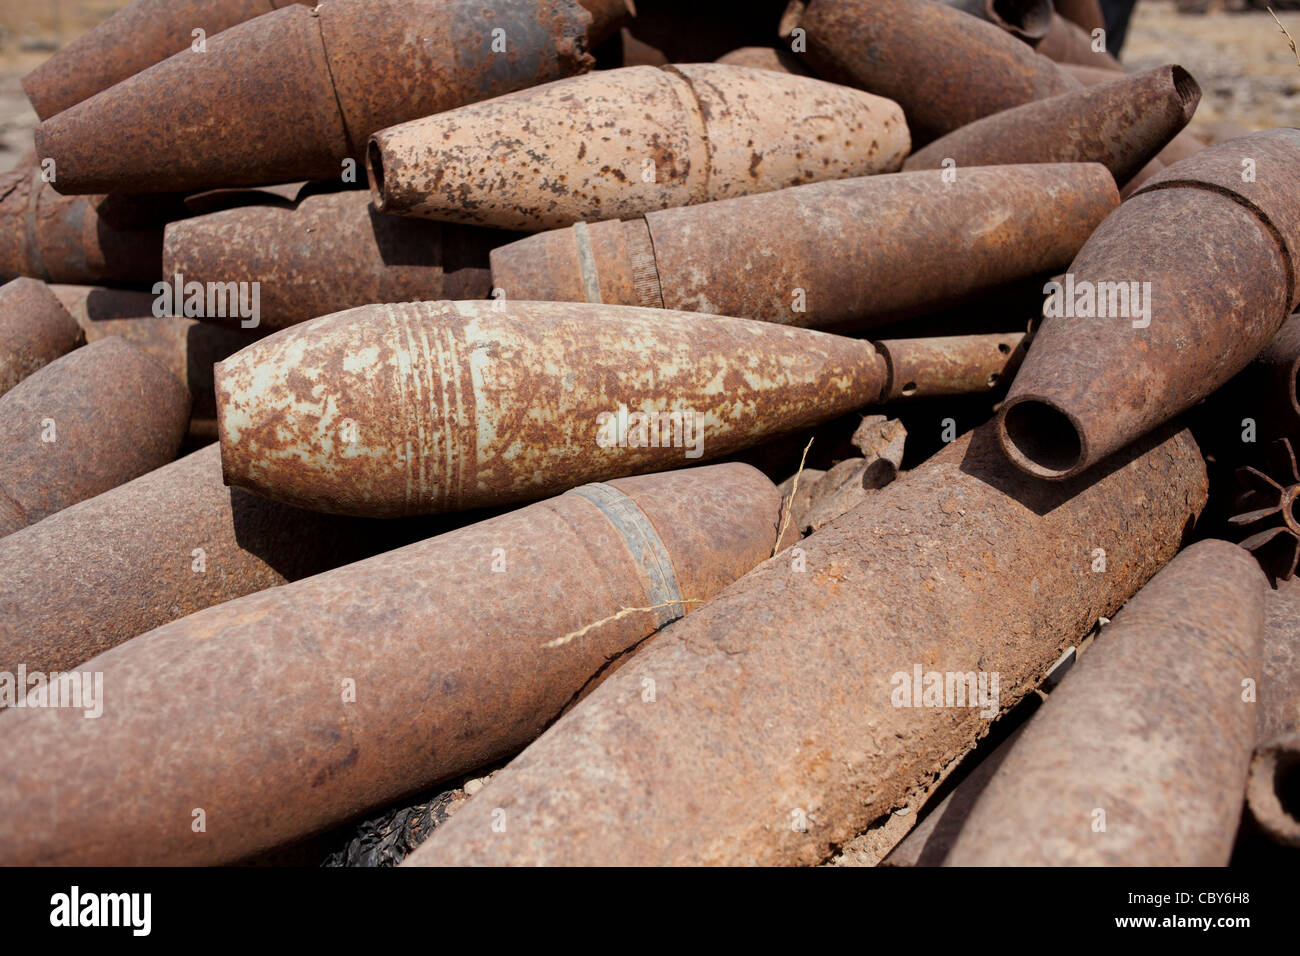 Artillery and mortar shells lie rusting in the sun in a scrap yard in Iraq. Stock Photo